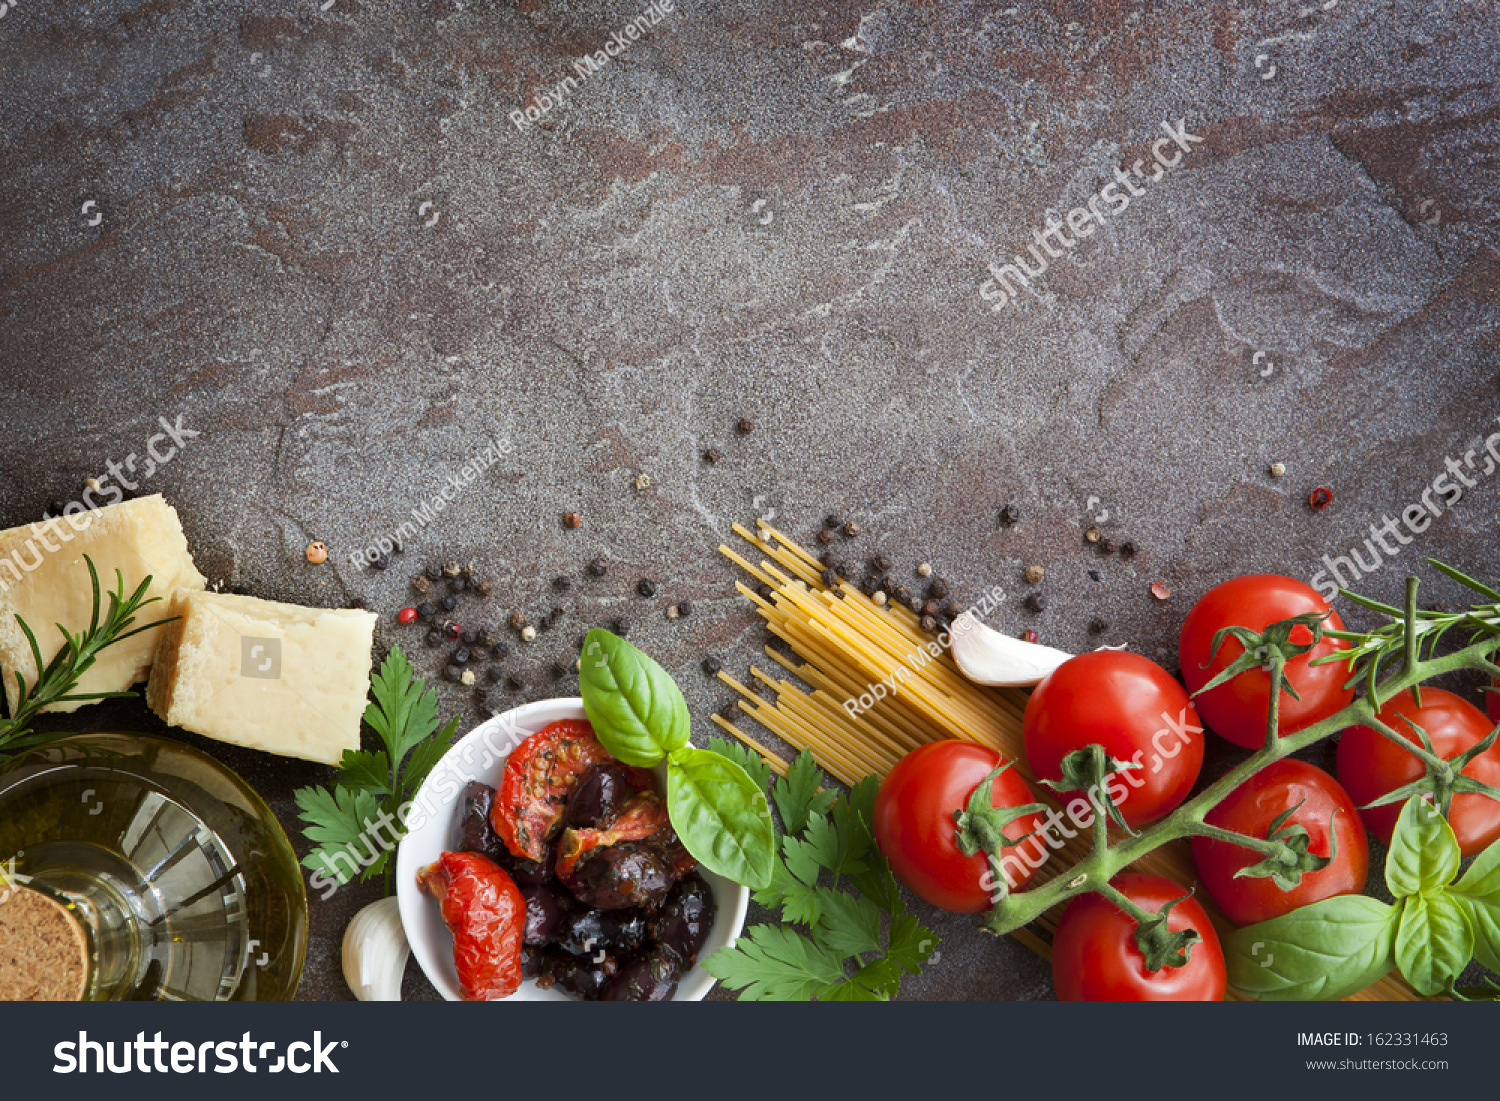 Italian food background, with vine tomatoes, basil, spaghetti, mushrooms, olives, parmesan, olive oil, garlic, peppercorns, rosemary, parsley and thyme.  Slate background. #162331463